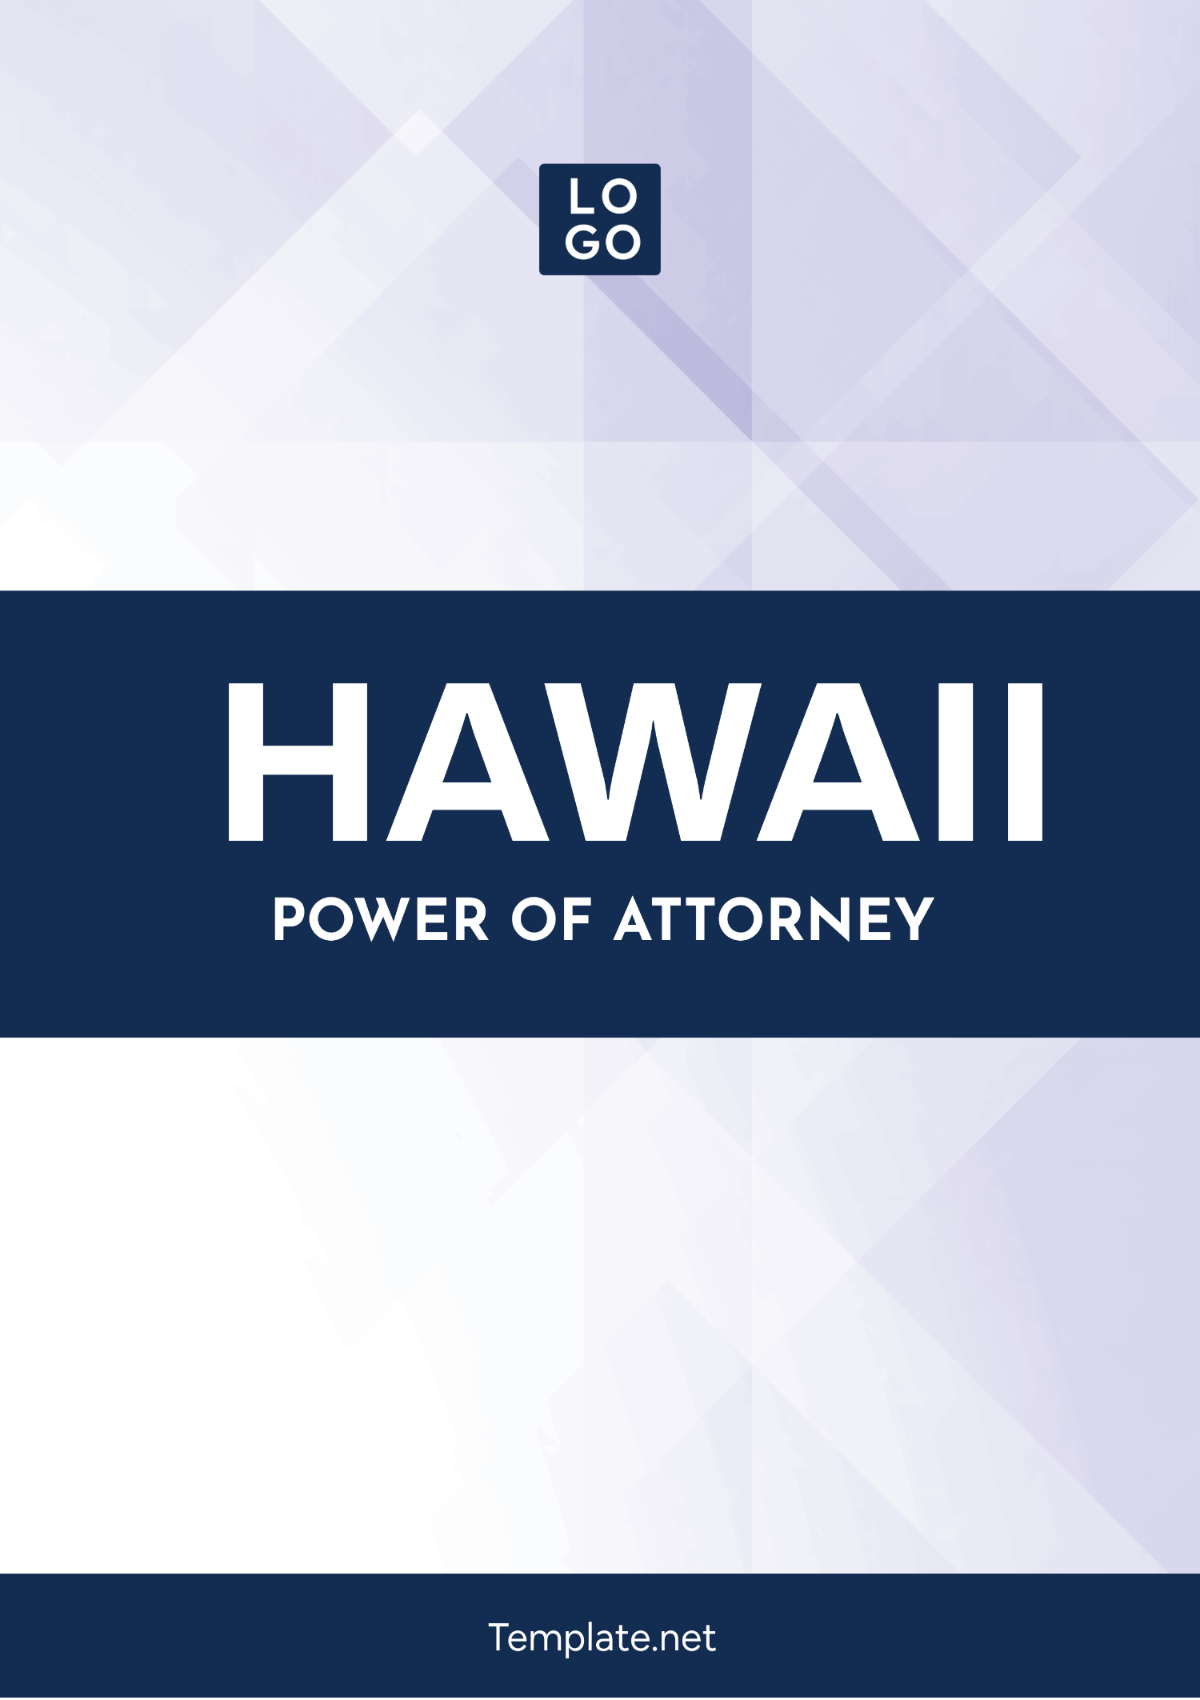 Hawaii Power of Attorney Template